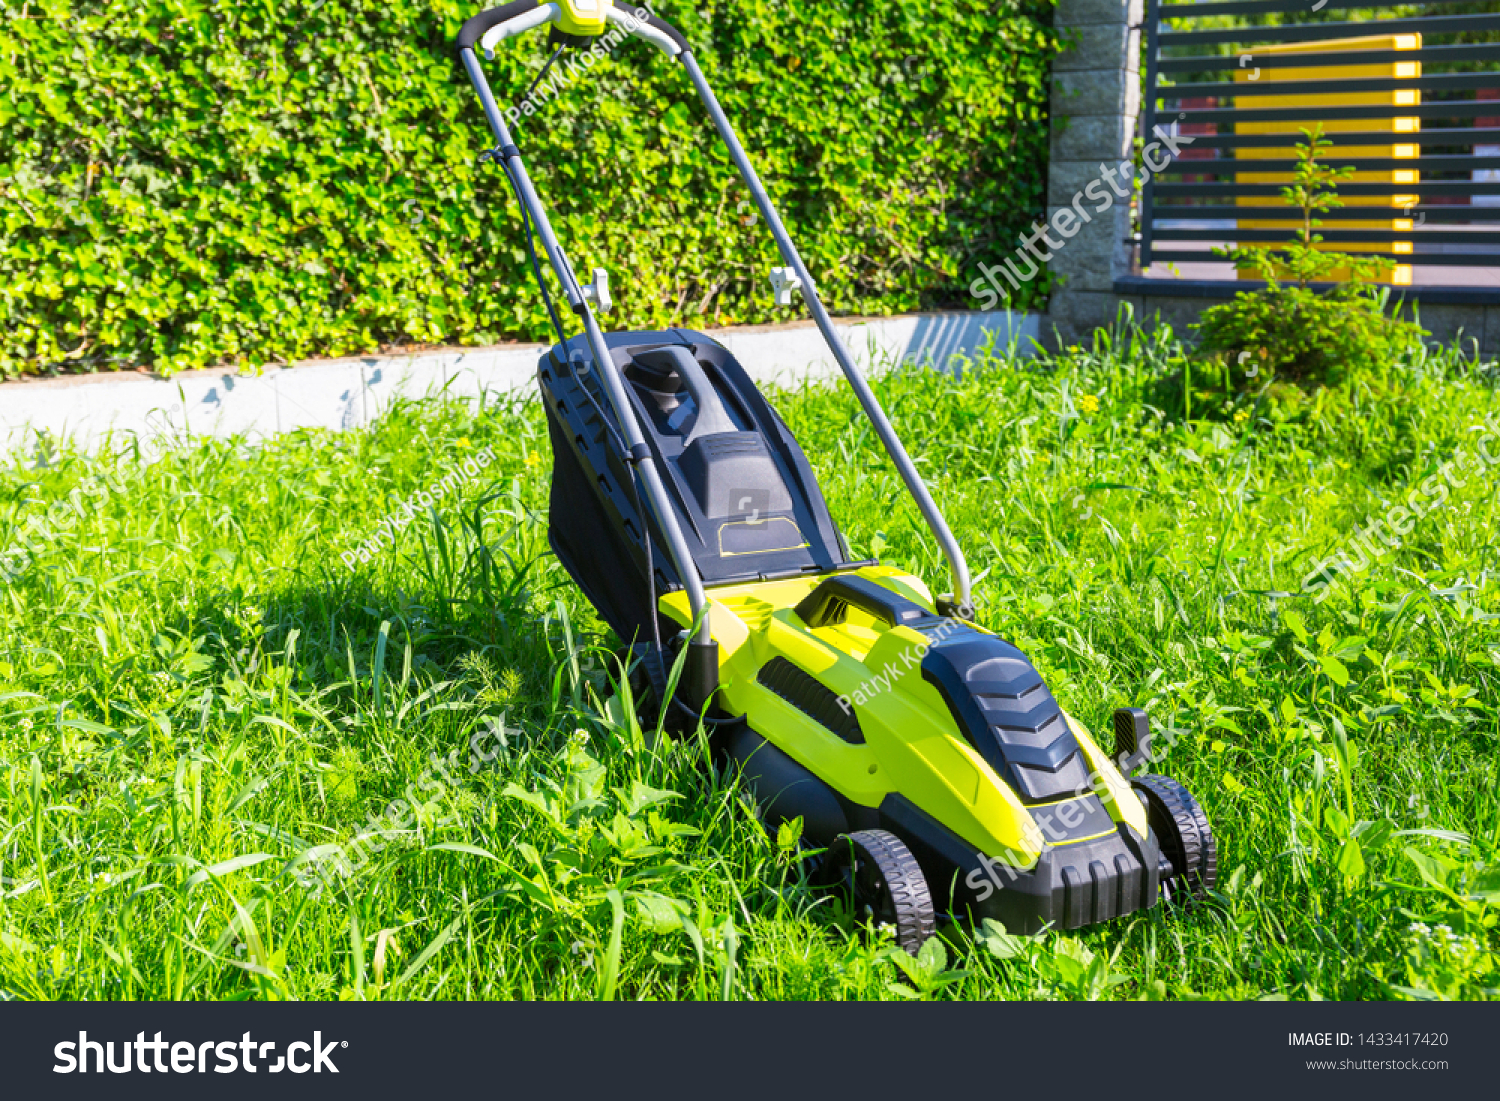 how was grass cut before lawn mowers